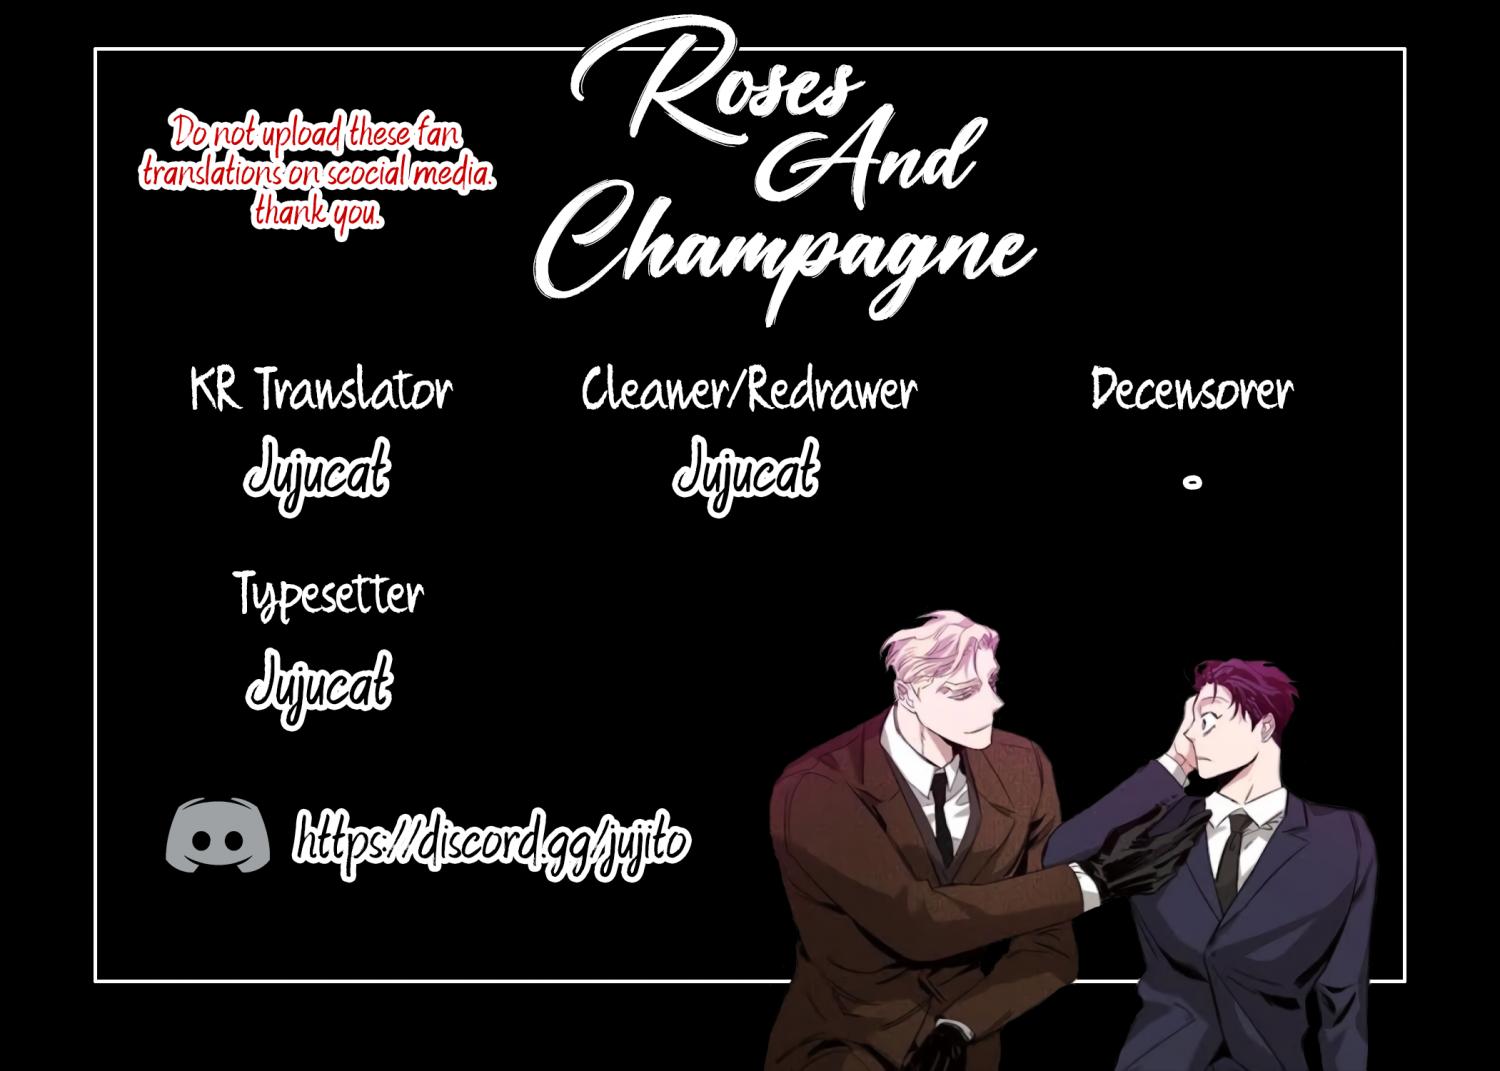 Roses And Champagne - Page 1